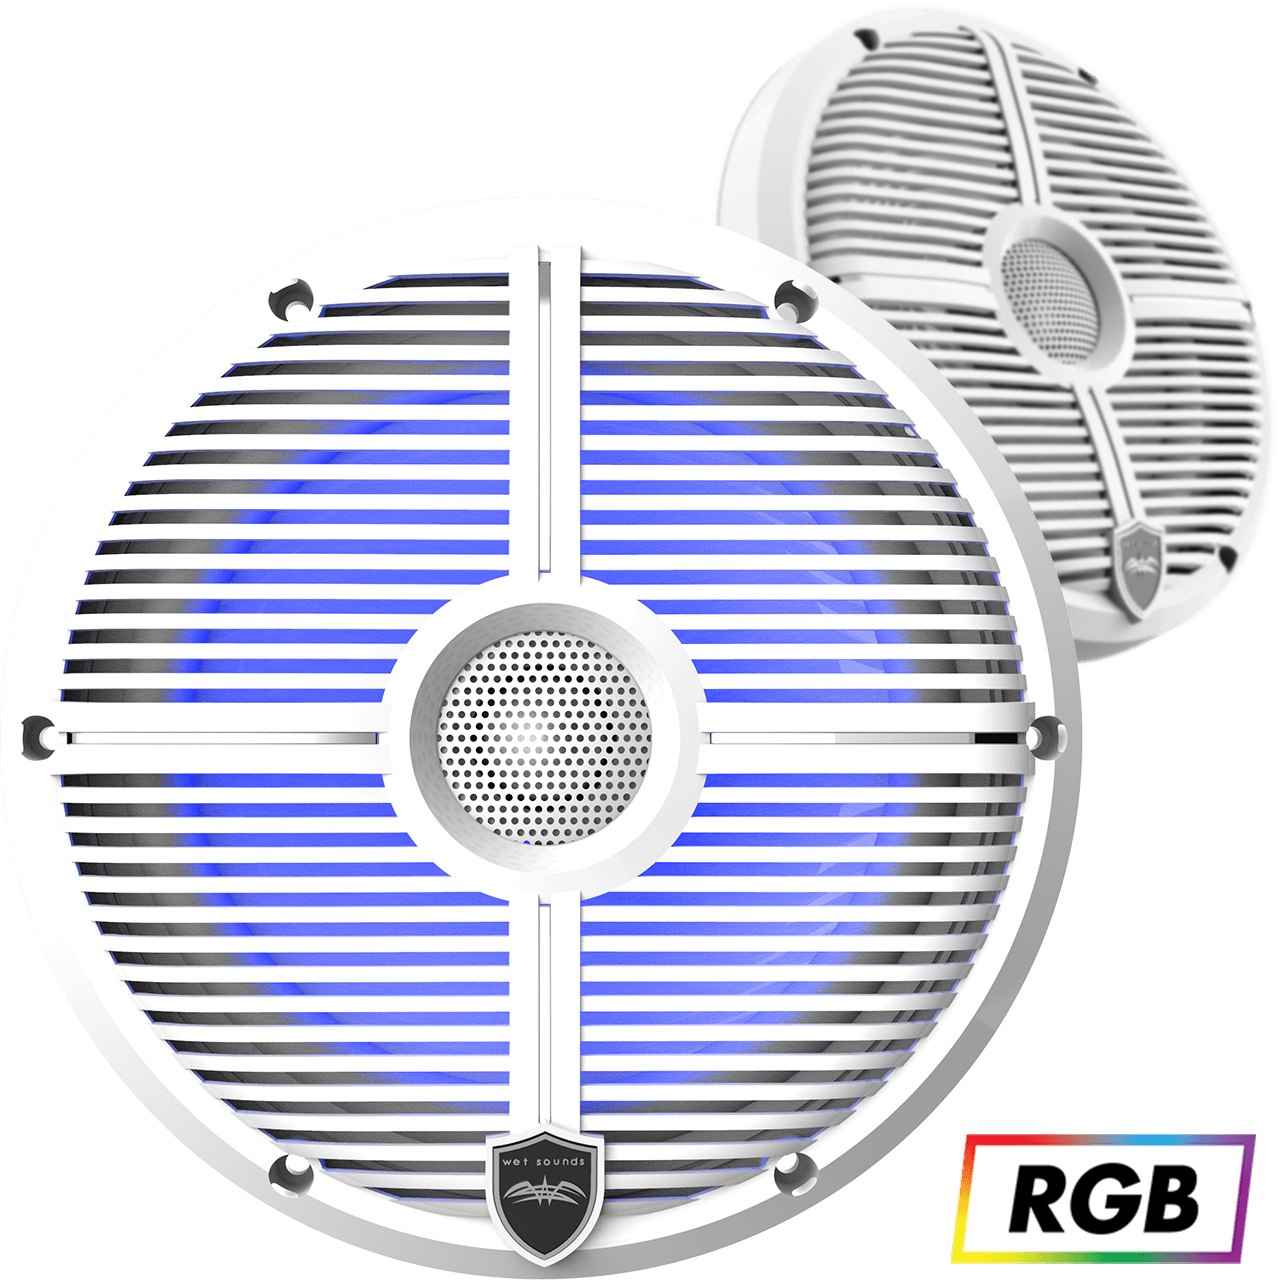 REVO 8-XW-W White Closed XW Grille 8” Coaxial Speakers (pair)